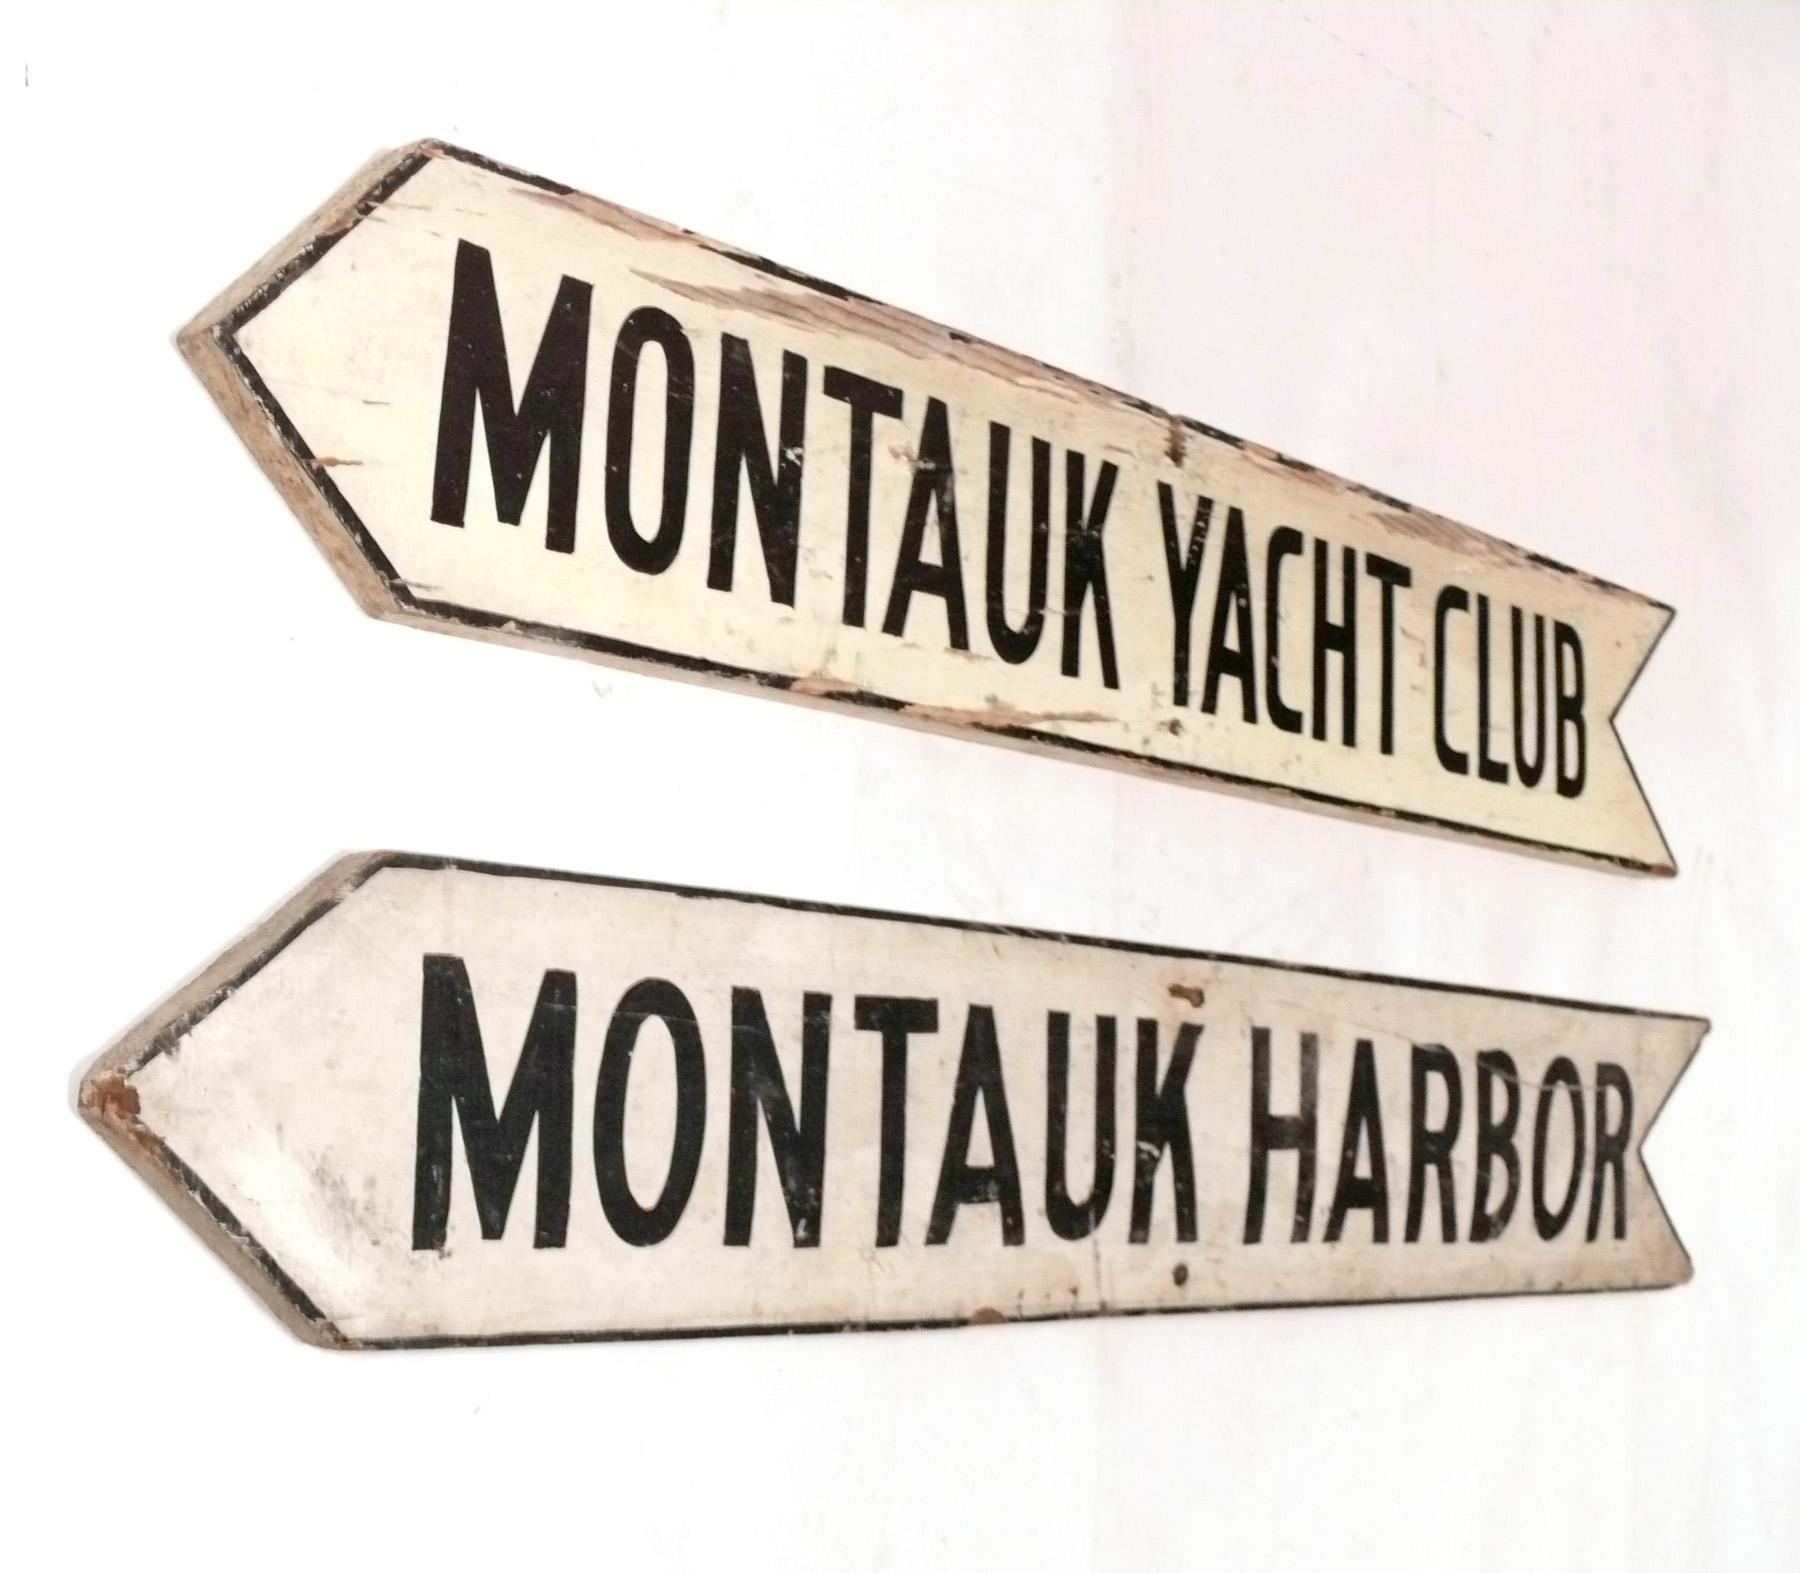 Vintage Montauk NY Sign, circa 1950s. They are priced at $950 each. The Montauk Harbor sign has been SOLD. The Montauk Yacht Club sign is available and measures 34